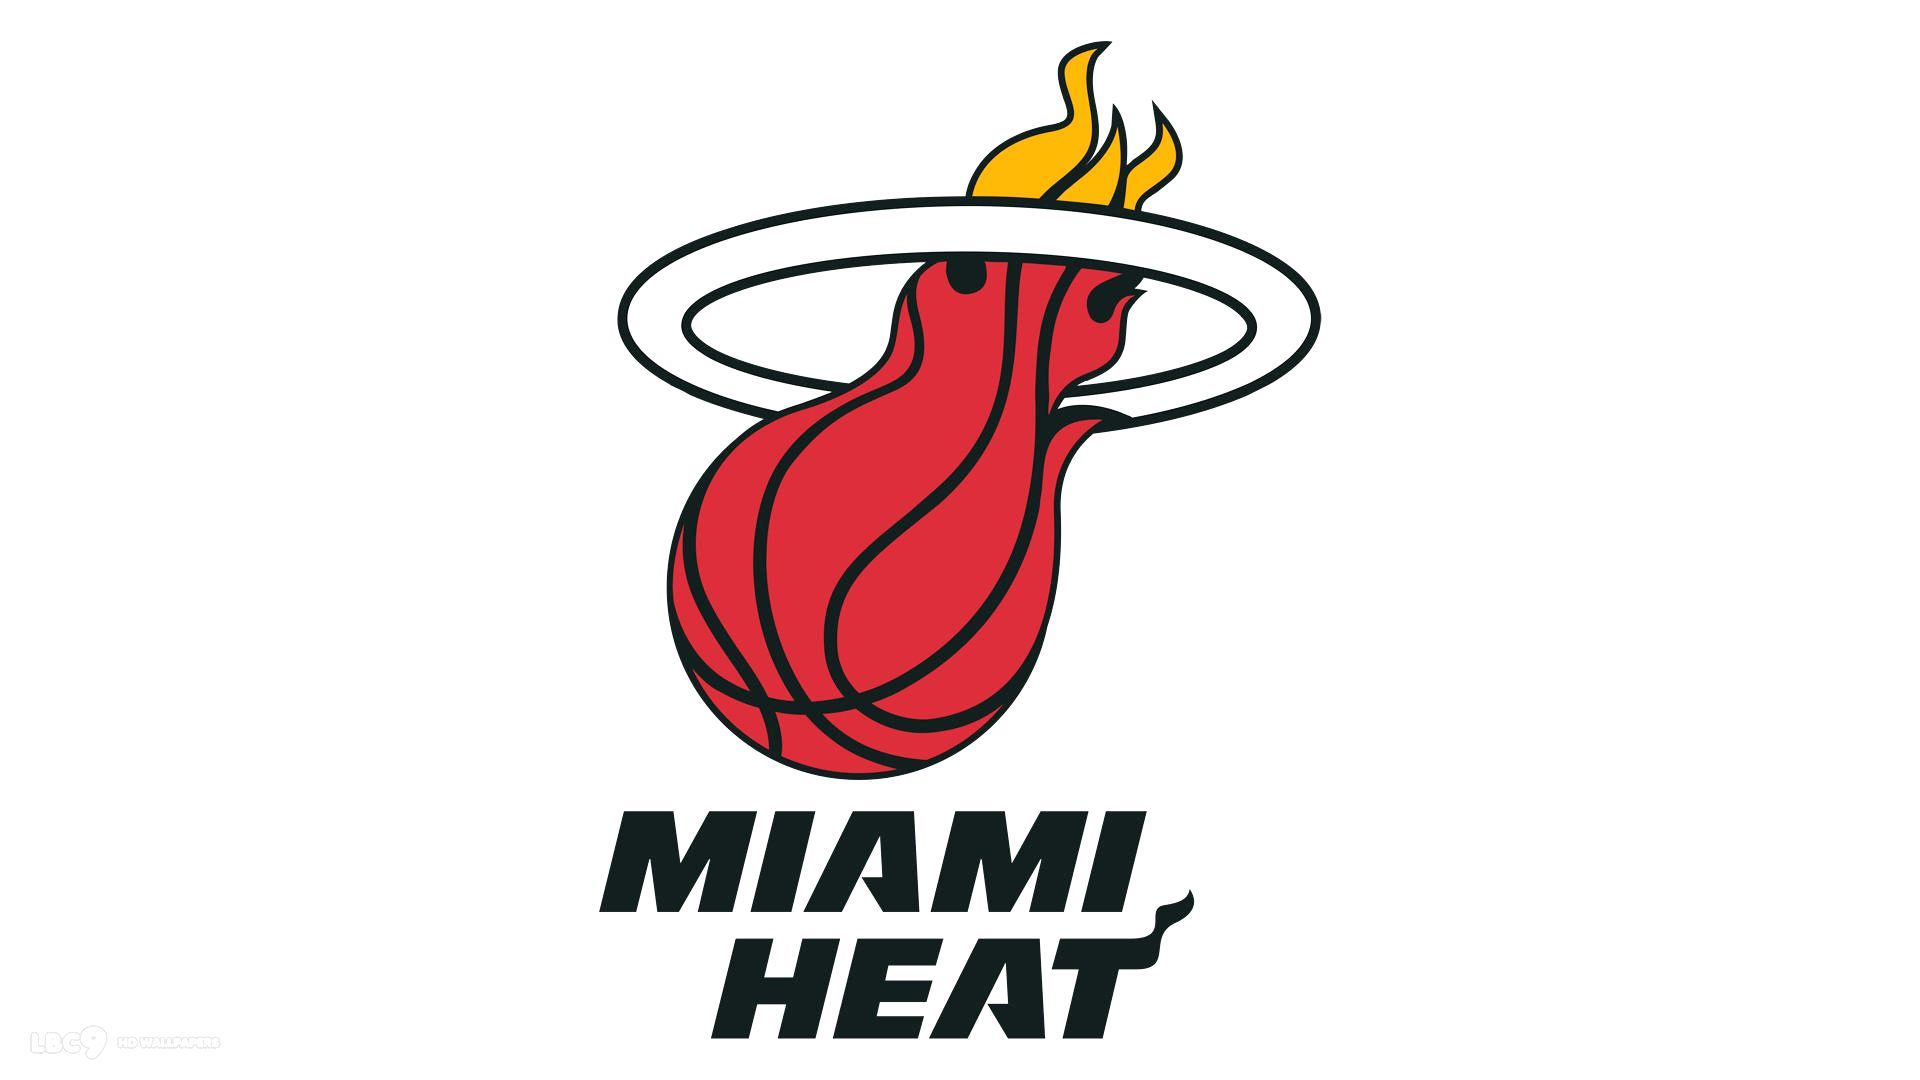 Miami Heat HD Wallpaper For Your